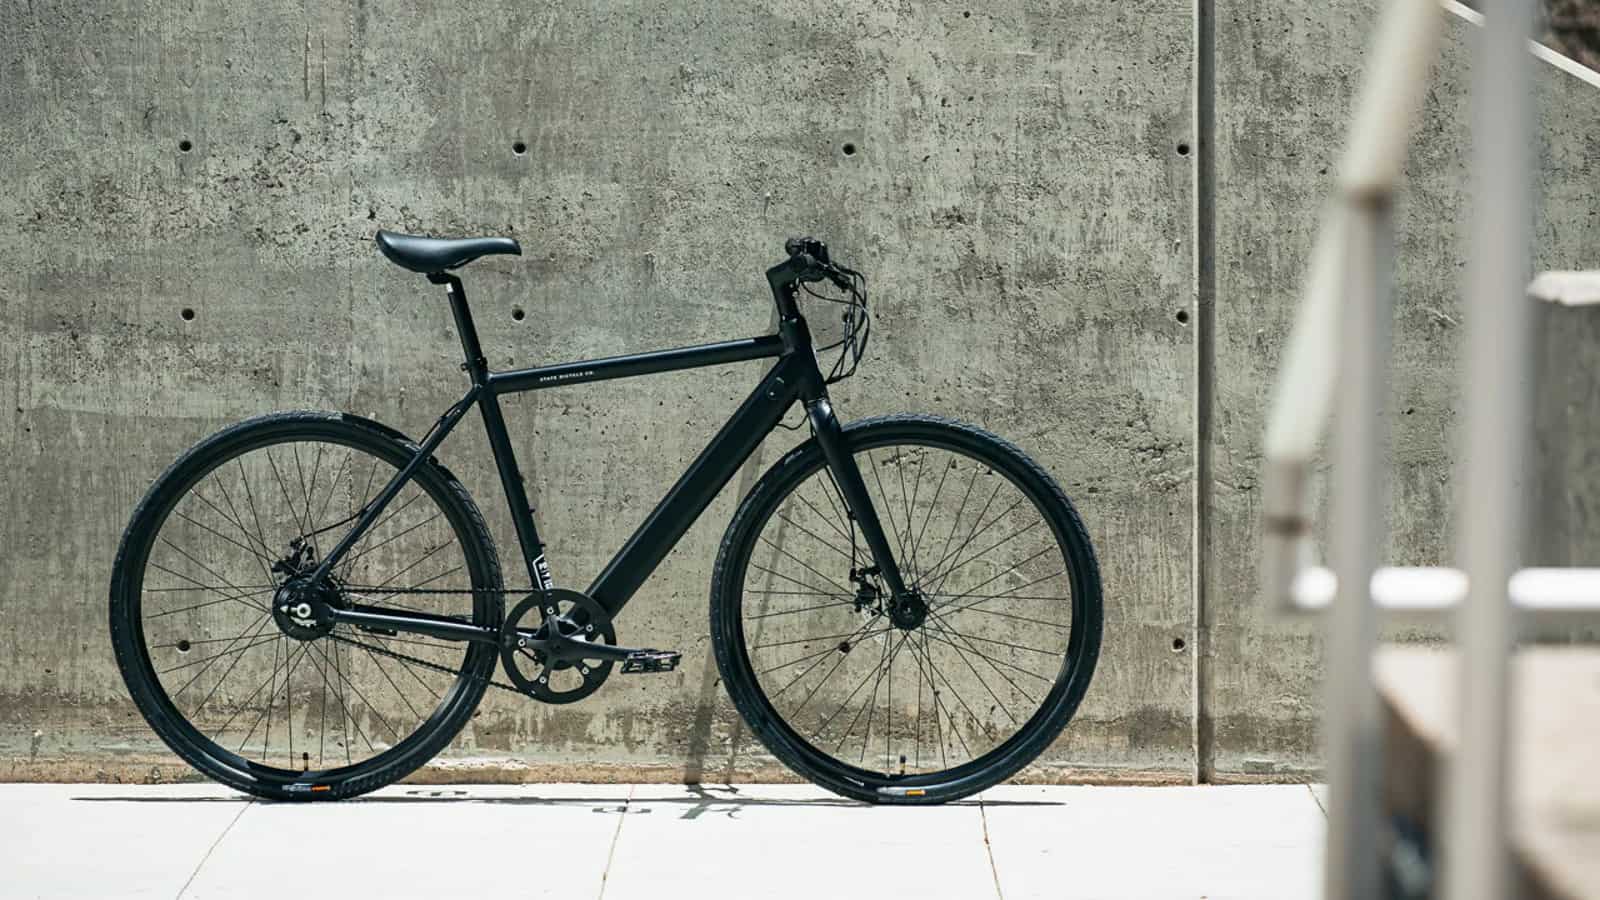 Reviews - Here's what People are Saying! No reviews yetWrite a reviewAsk a question 6061 - EBIKE COMMUTER - MATTE BLACK POWER TO EXPLORE YOUR STATE